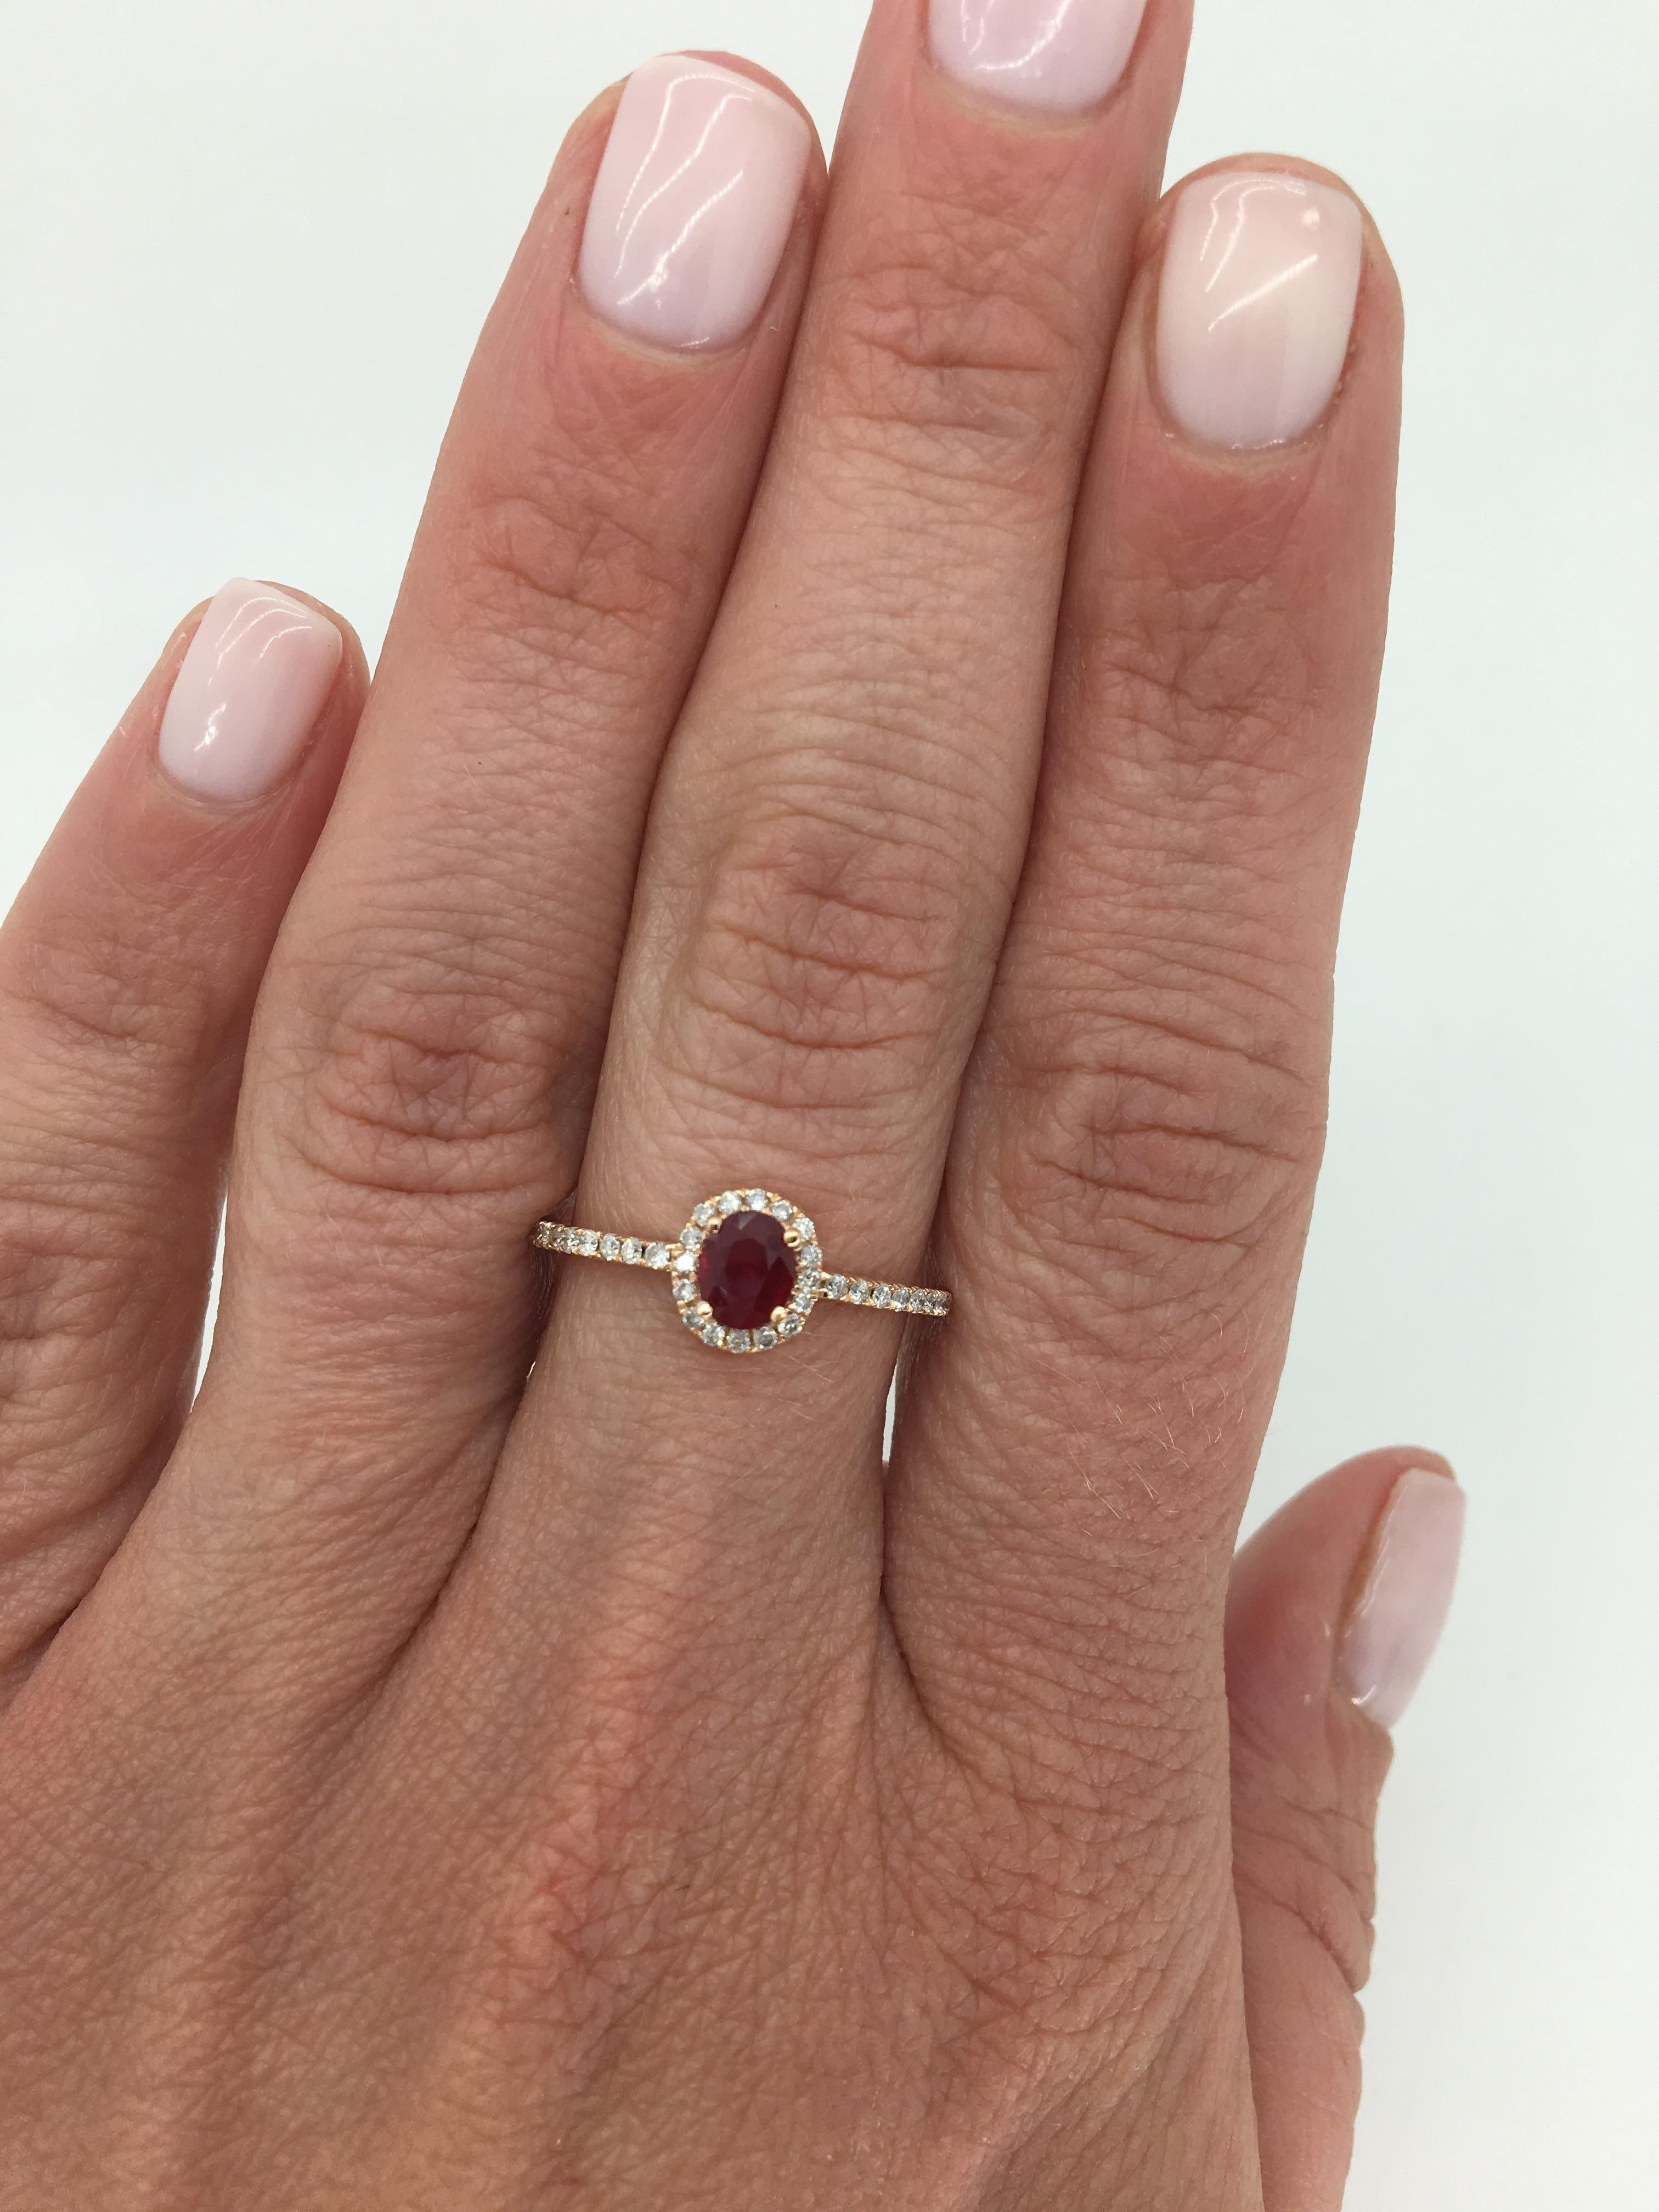 Oval Cut Ruby and diamond ring crafted in 14K rose gold. 

Gemstone: Ruby and Diamond
Gemstone Carat Weight: Approximately .35CT Oval Cut
Diamond Carat Weight: Approximately .23CTW
Diamond Cut: Round Brilliant Cut
Color: Average H-J
Clarity: Average